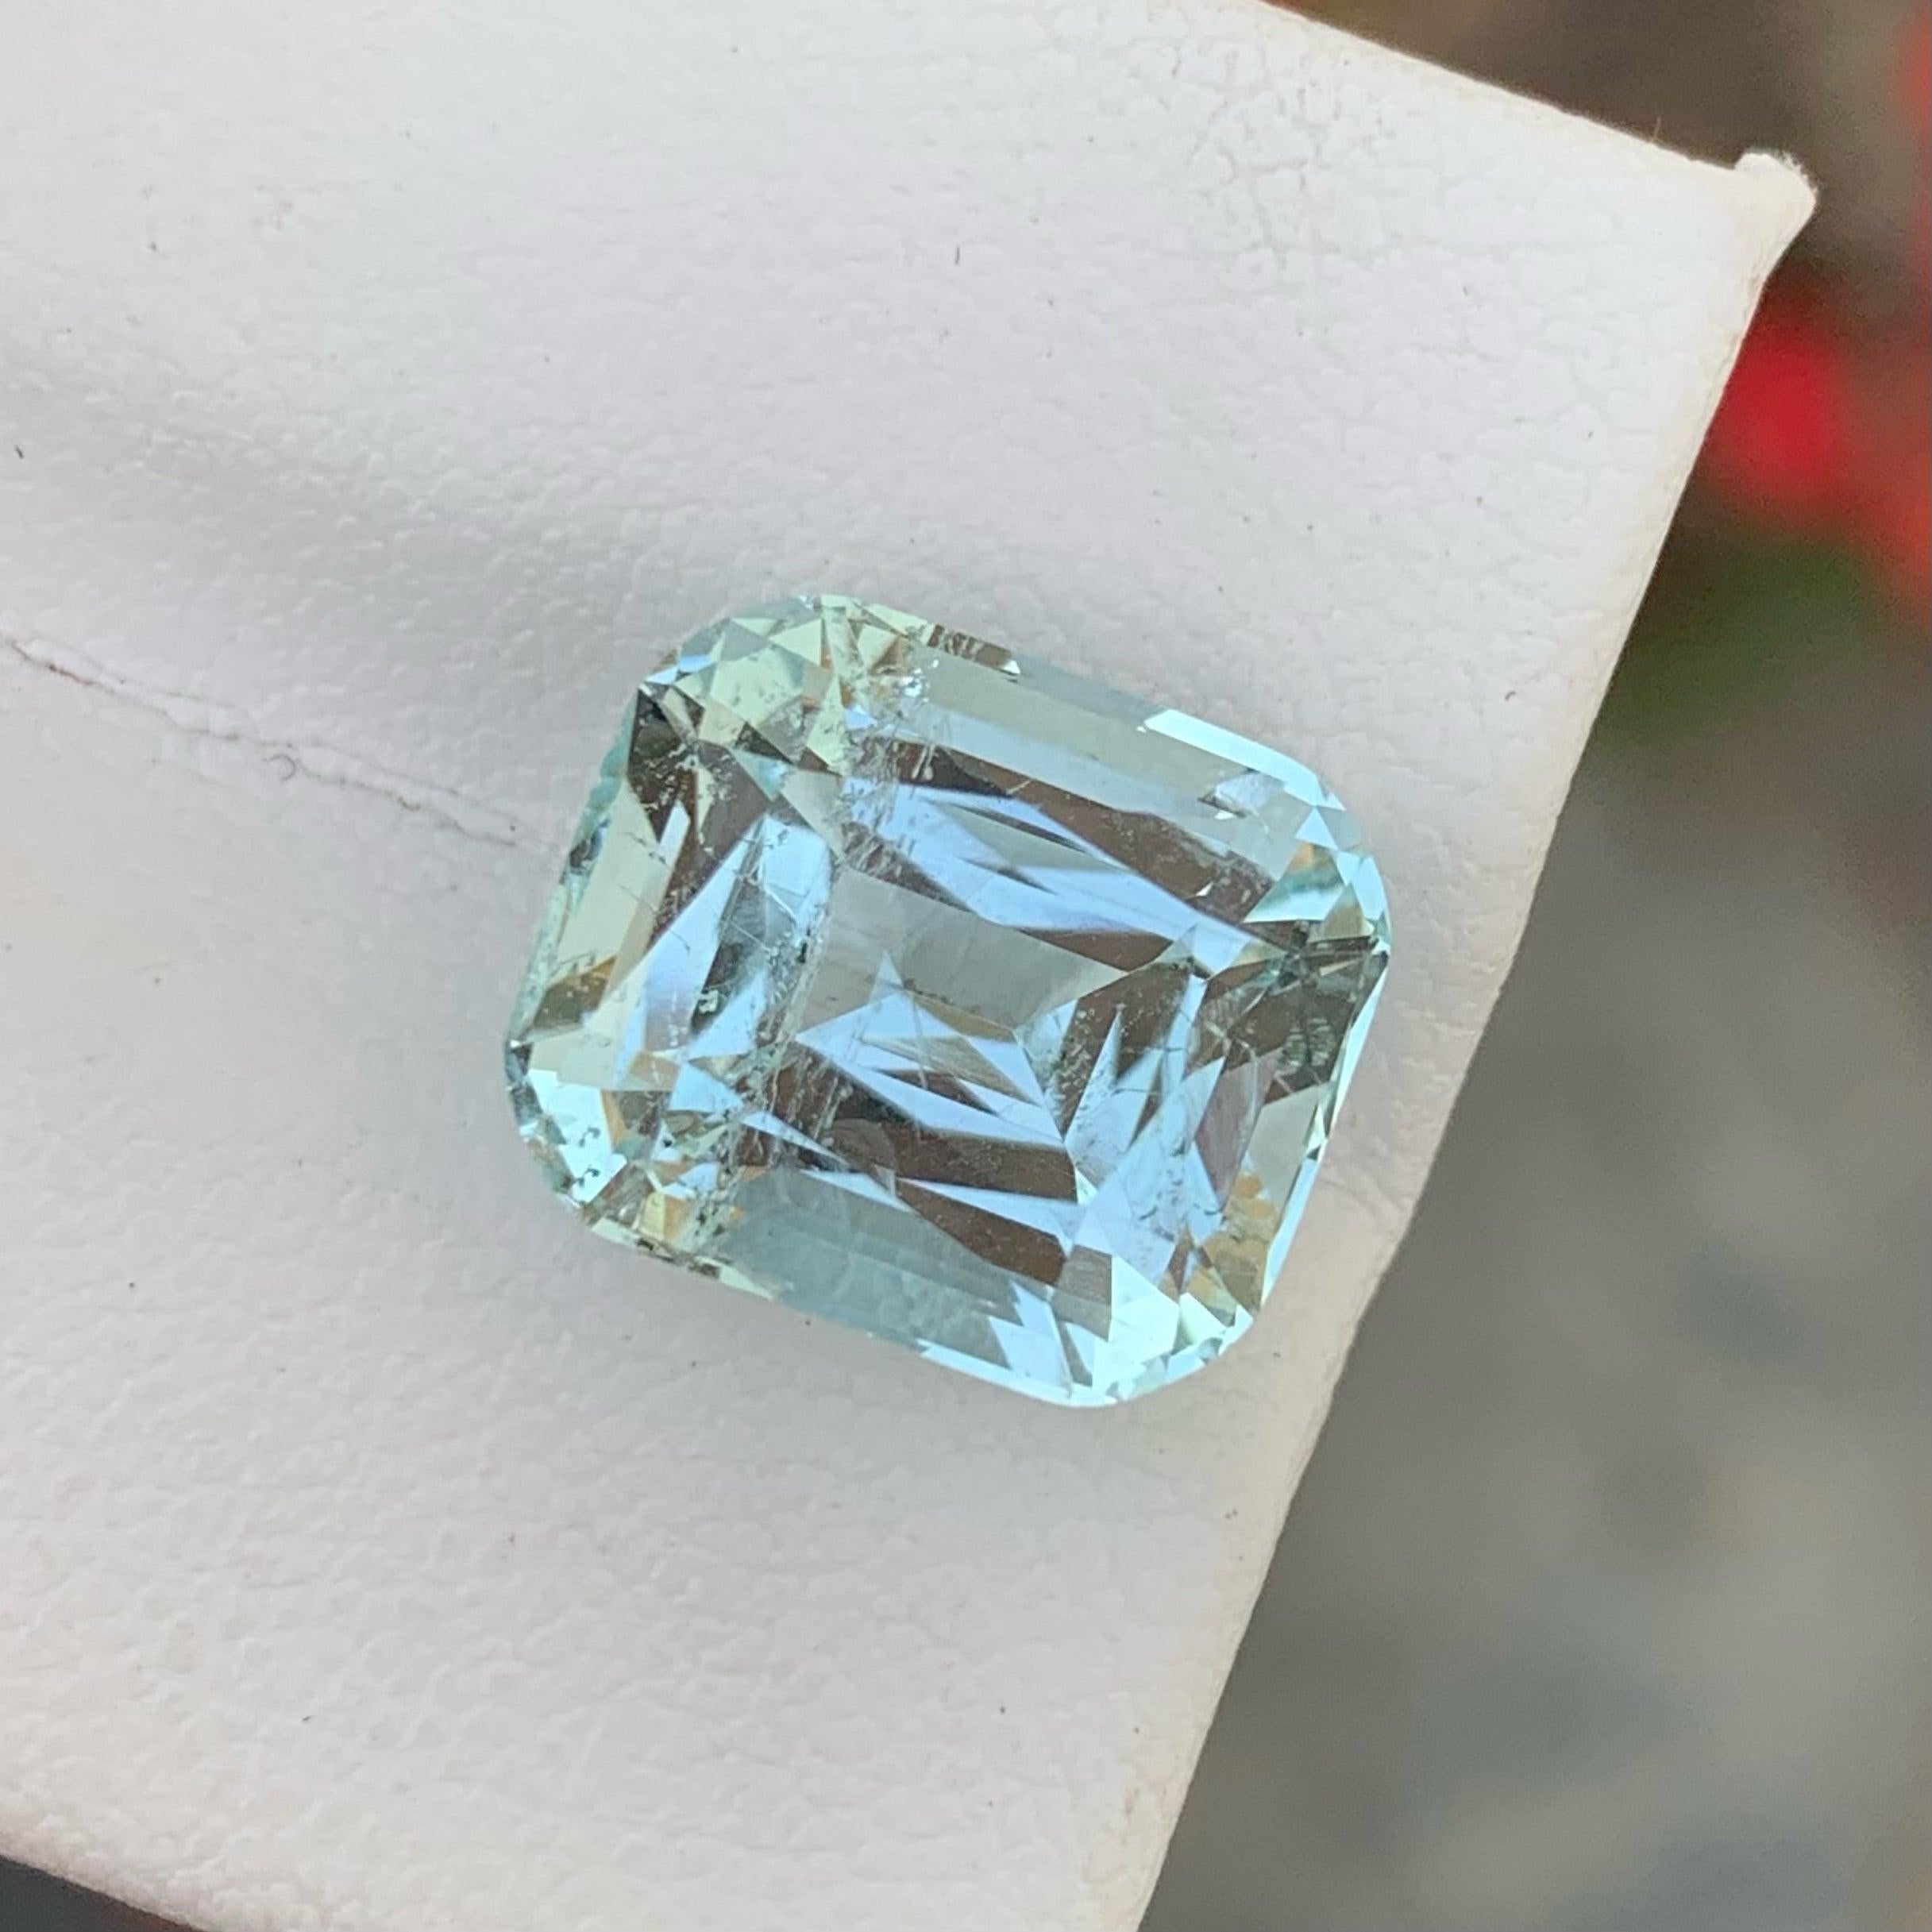 Excellent Natural Blue Aquamarine Gemstone, available for sale at wholesale price natural high quality 6.65 Carats Included Clarity Untreated Aquamarine from Pakistan.

Product Information:
GEMSTONE NAME: Excellent Natural Blue Aquamarine